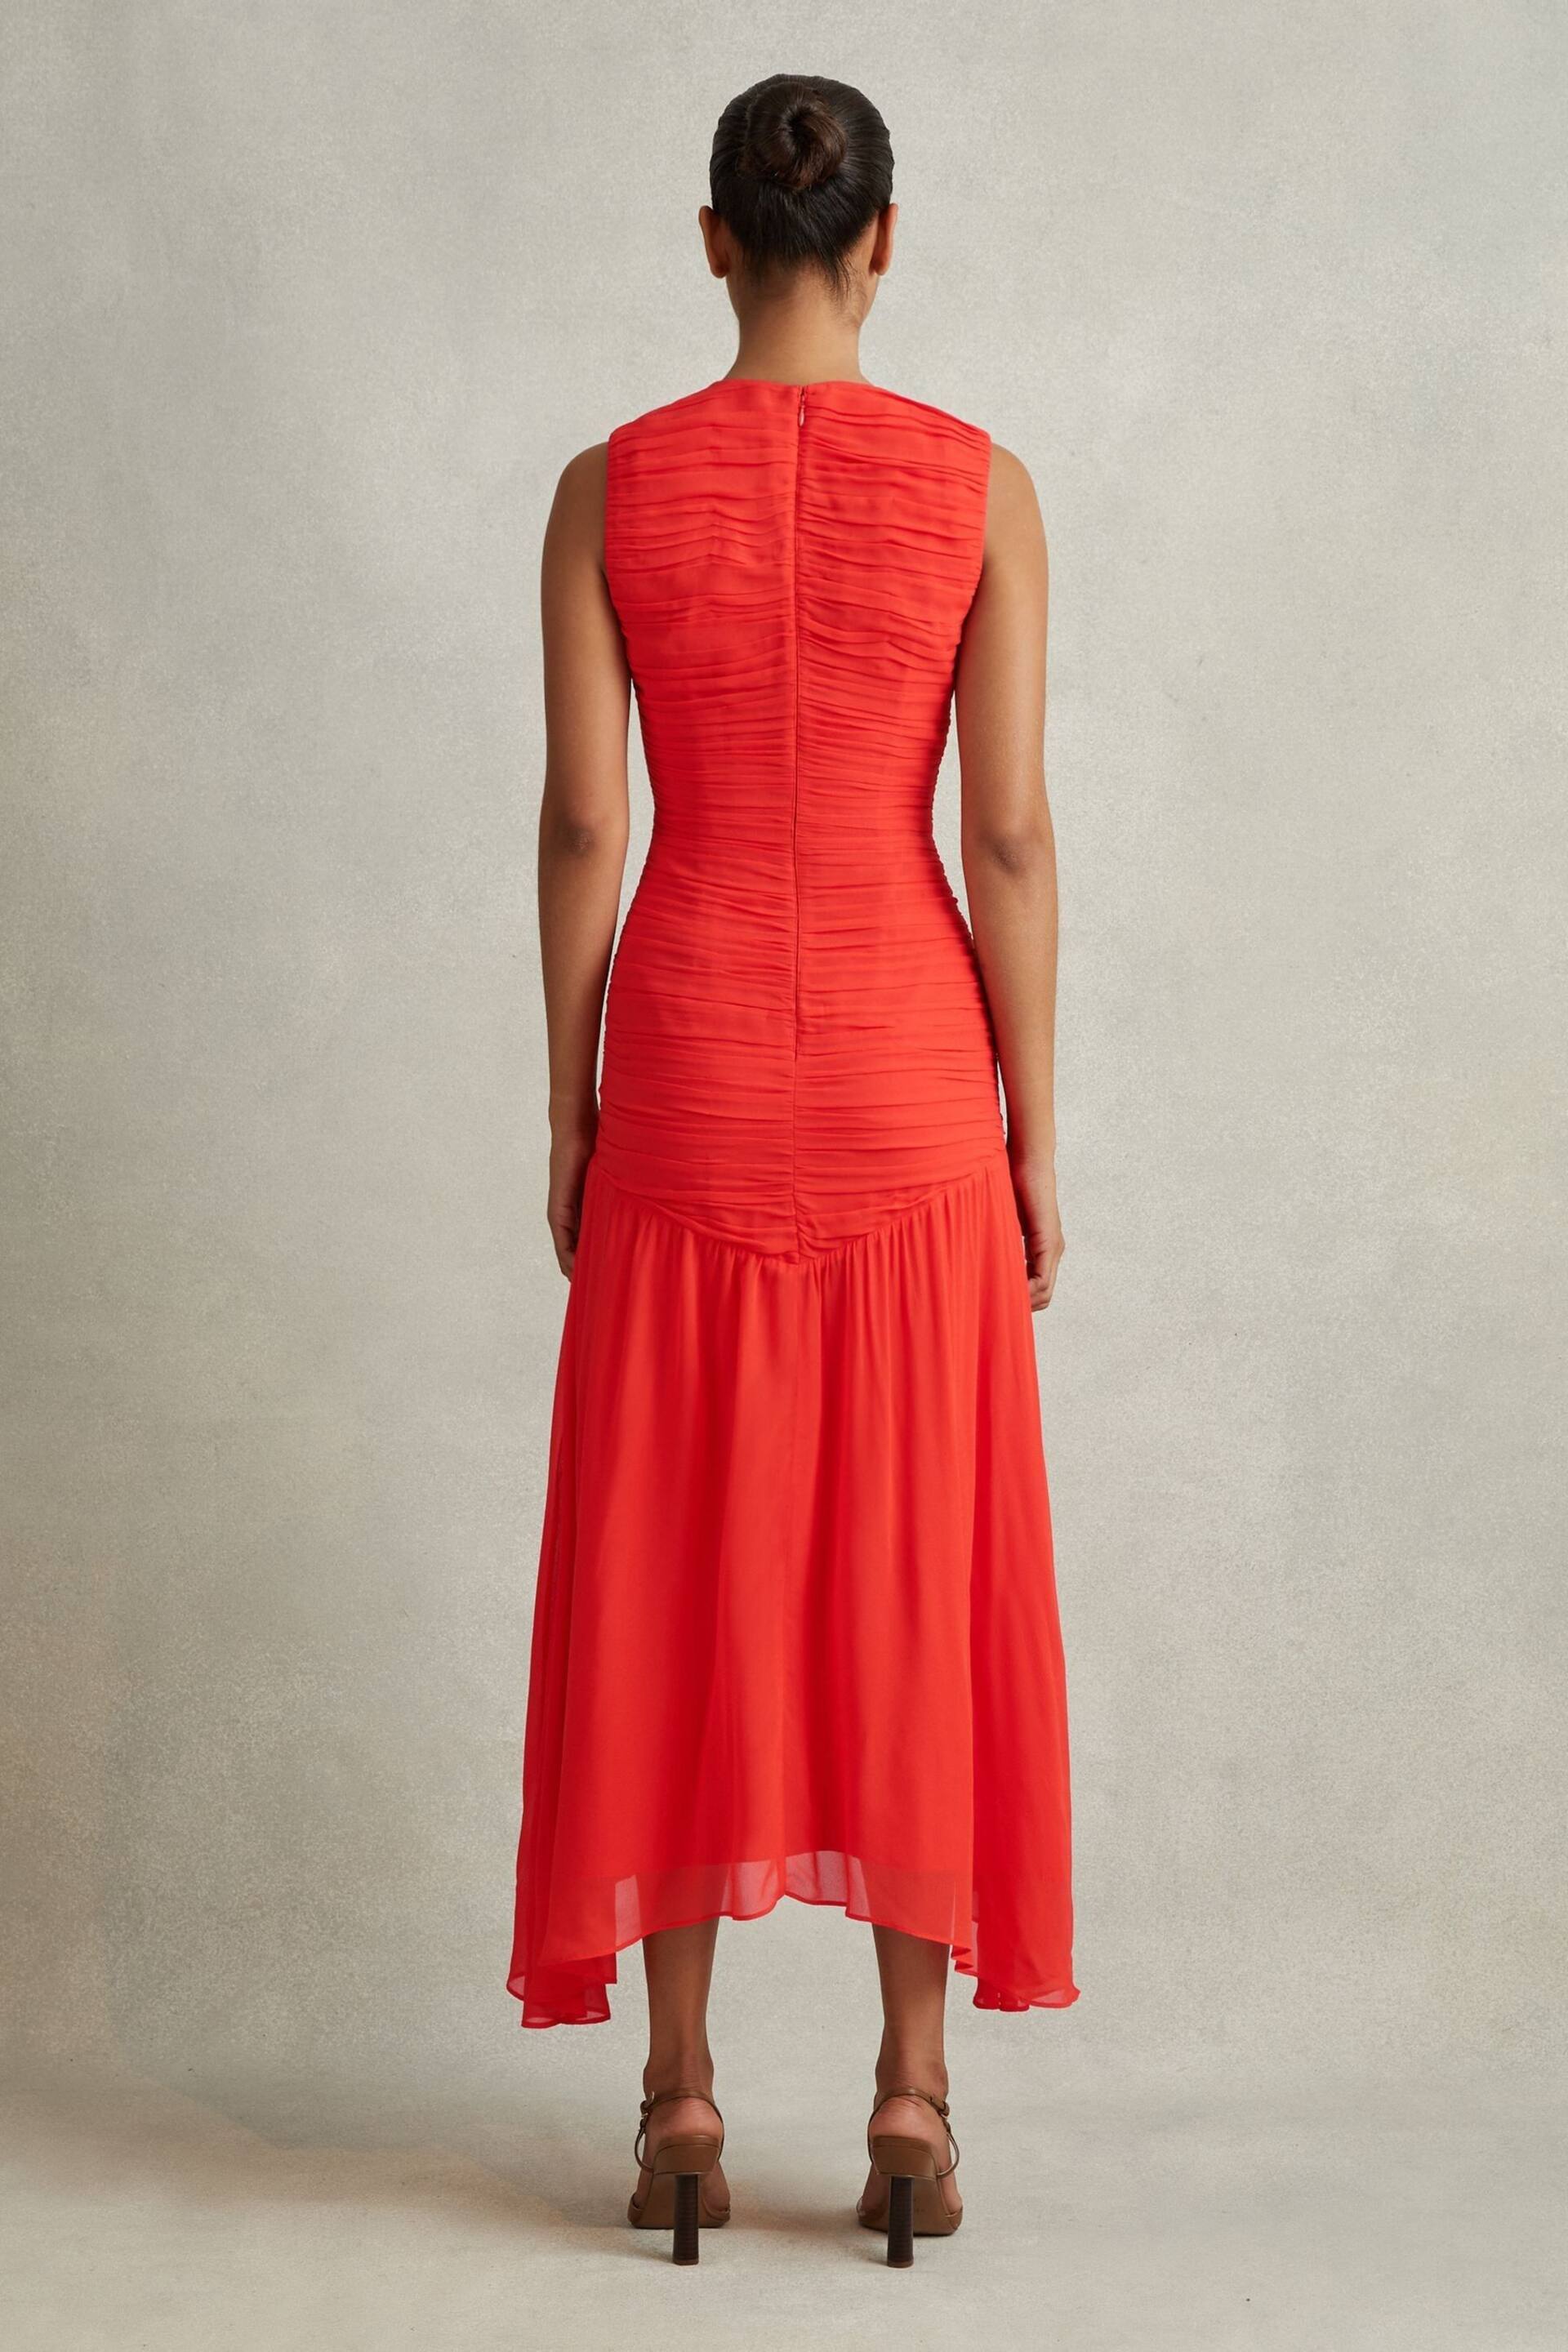 Reiss Coral Saffy Petite Ruched Bodycon Midi Dress - Image 5 of 7